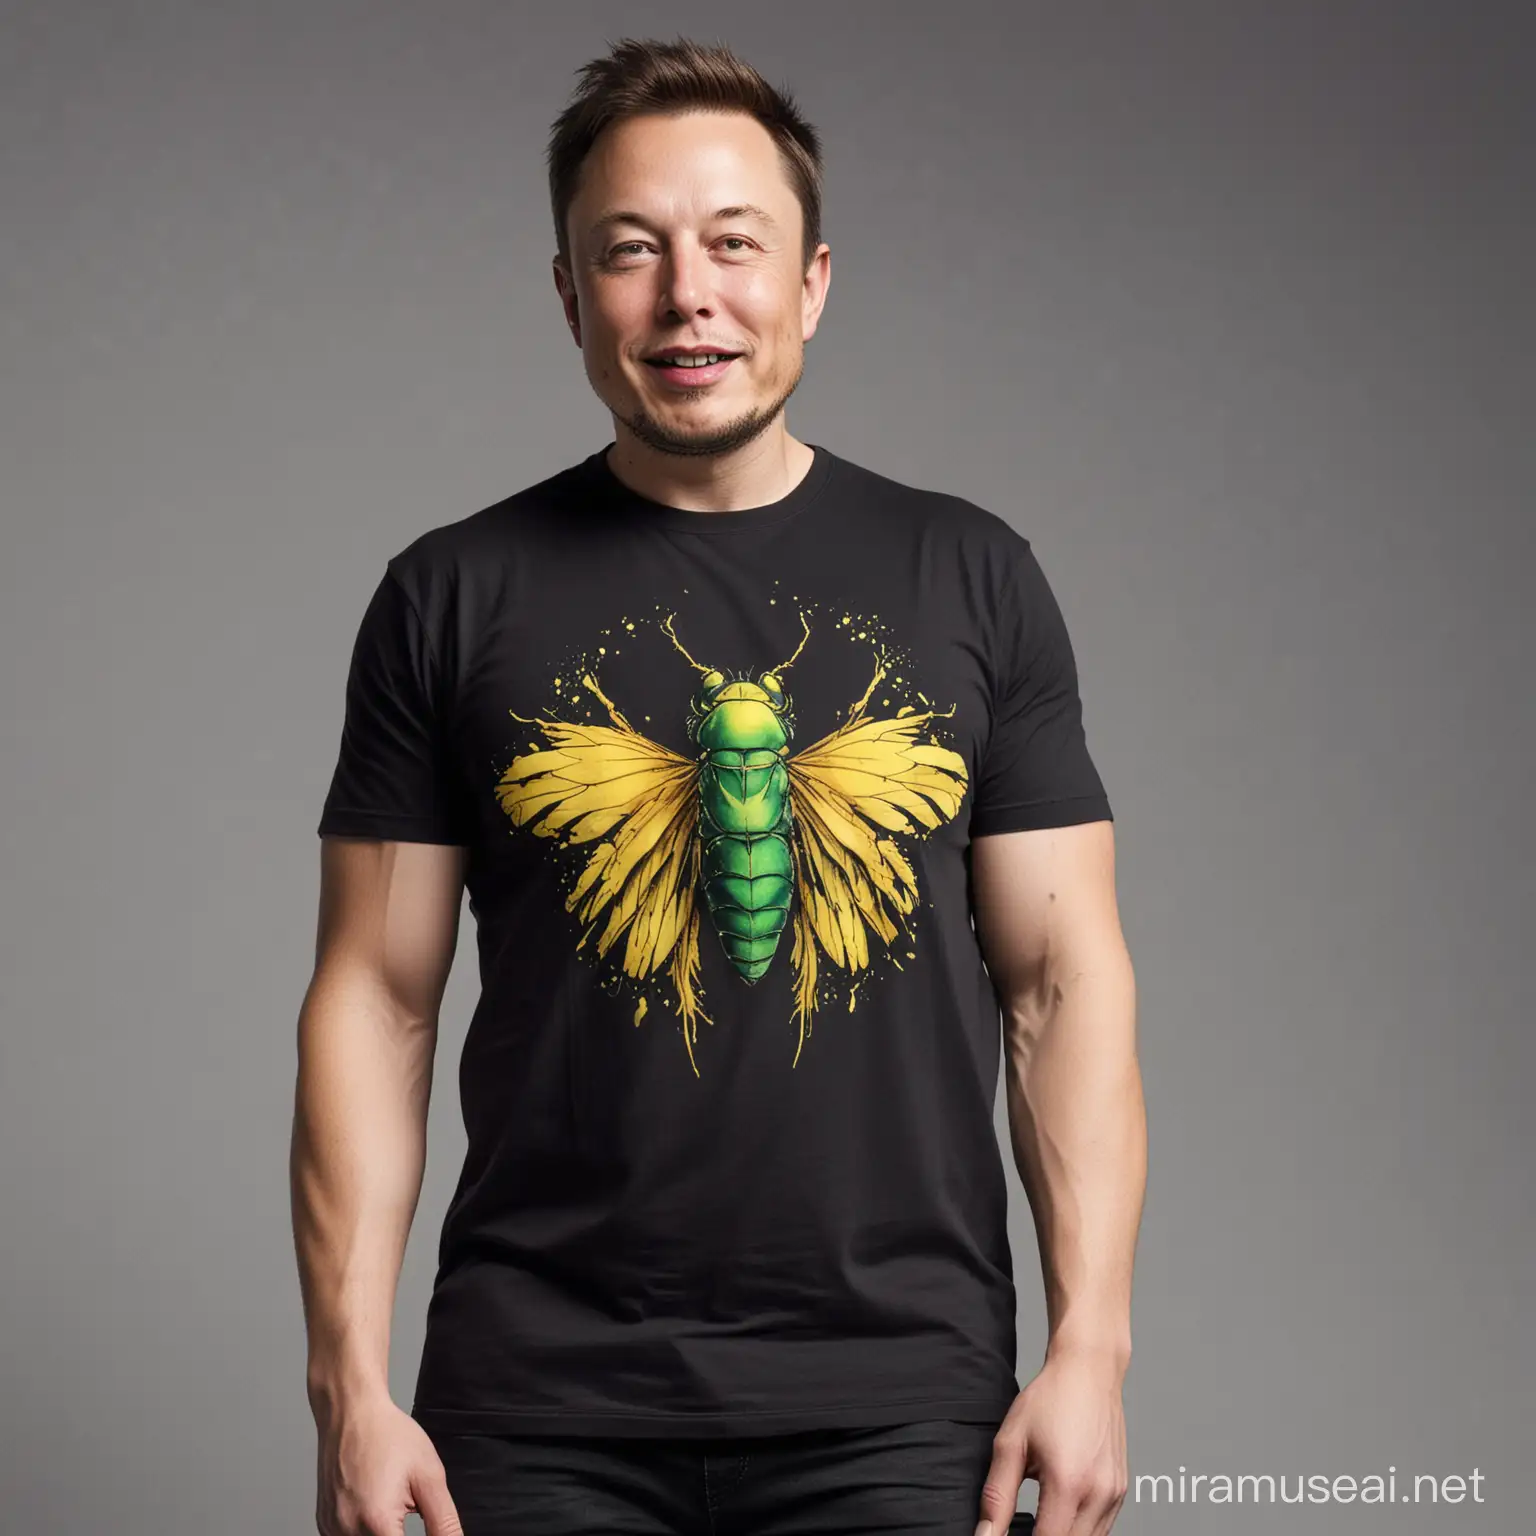 elon musk dressed in a t-shirt printed with a green and yellow fly